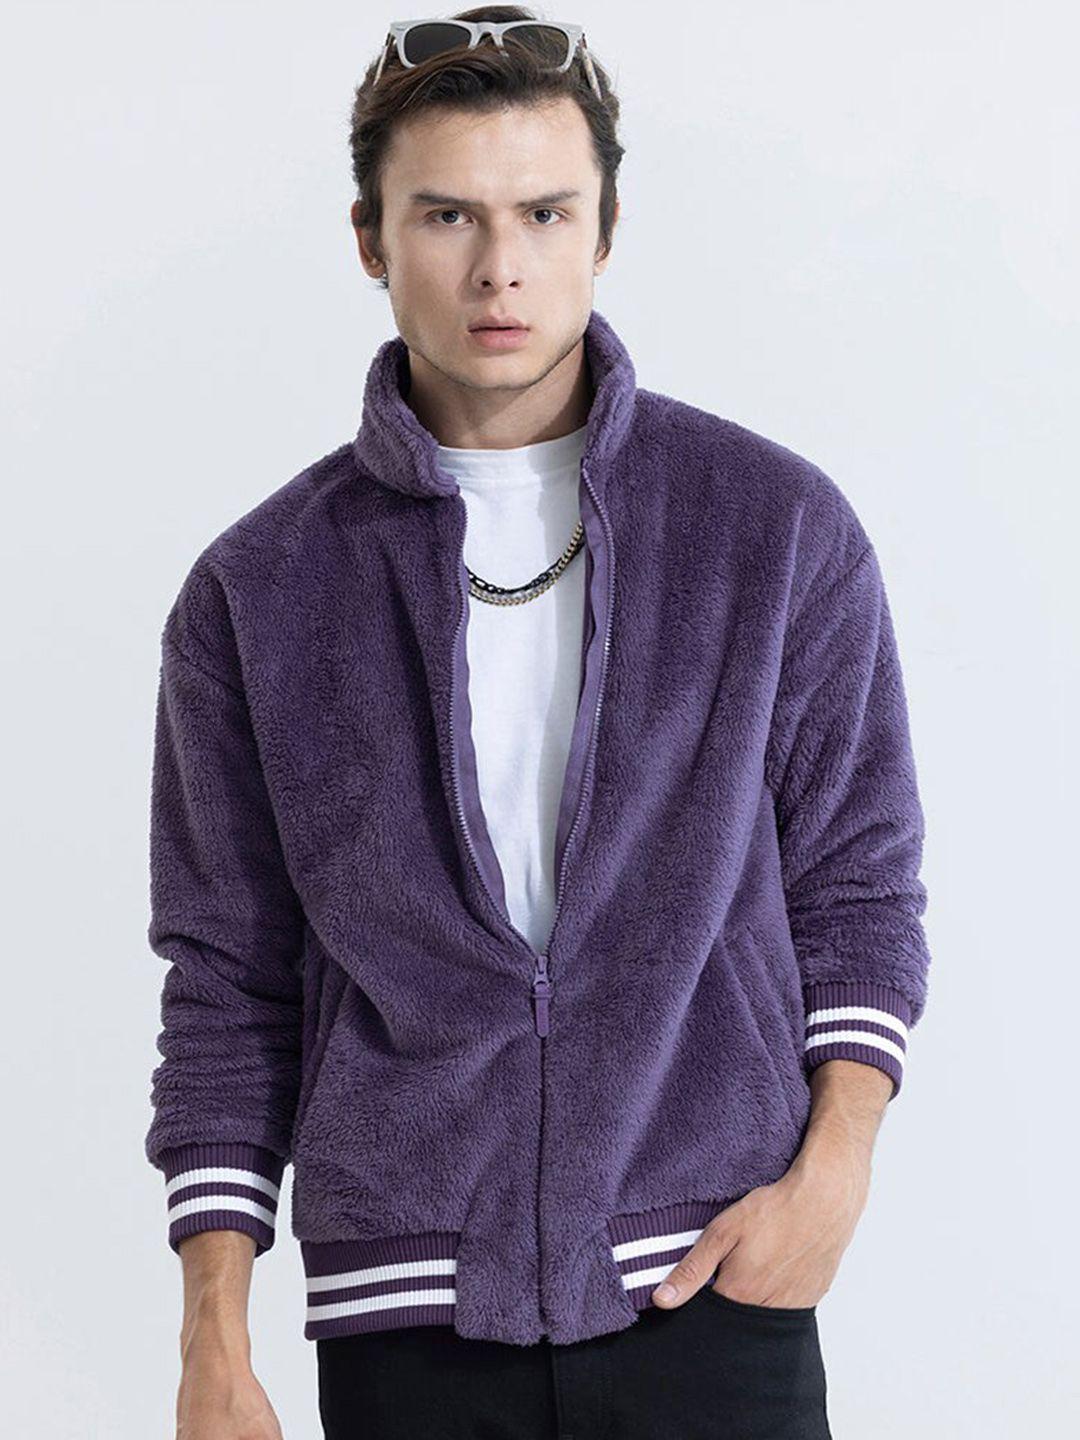 snitch-men-purple-striped-crop-varsity-jacket-with-embroidered